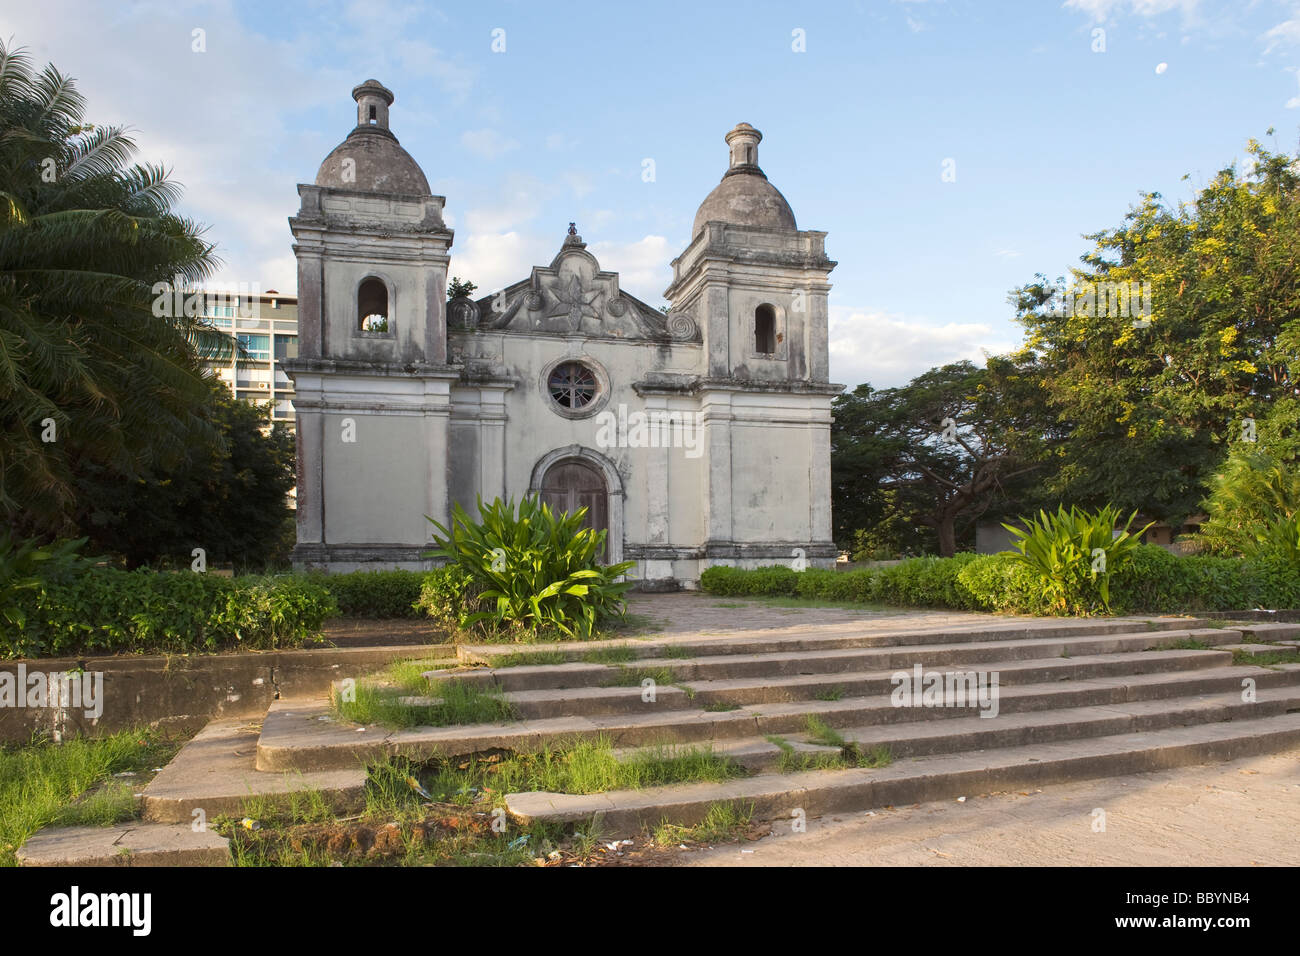 Cathedral built in 1776 Quelimane Mozambique Stock Photo